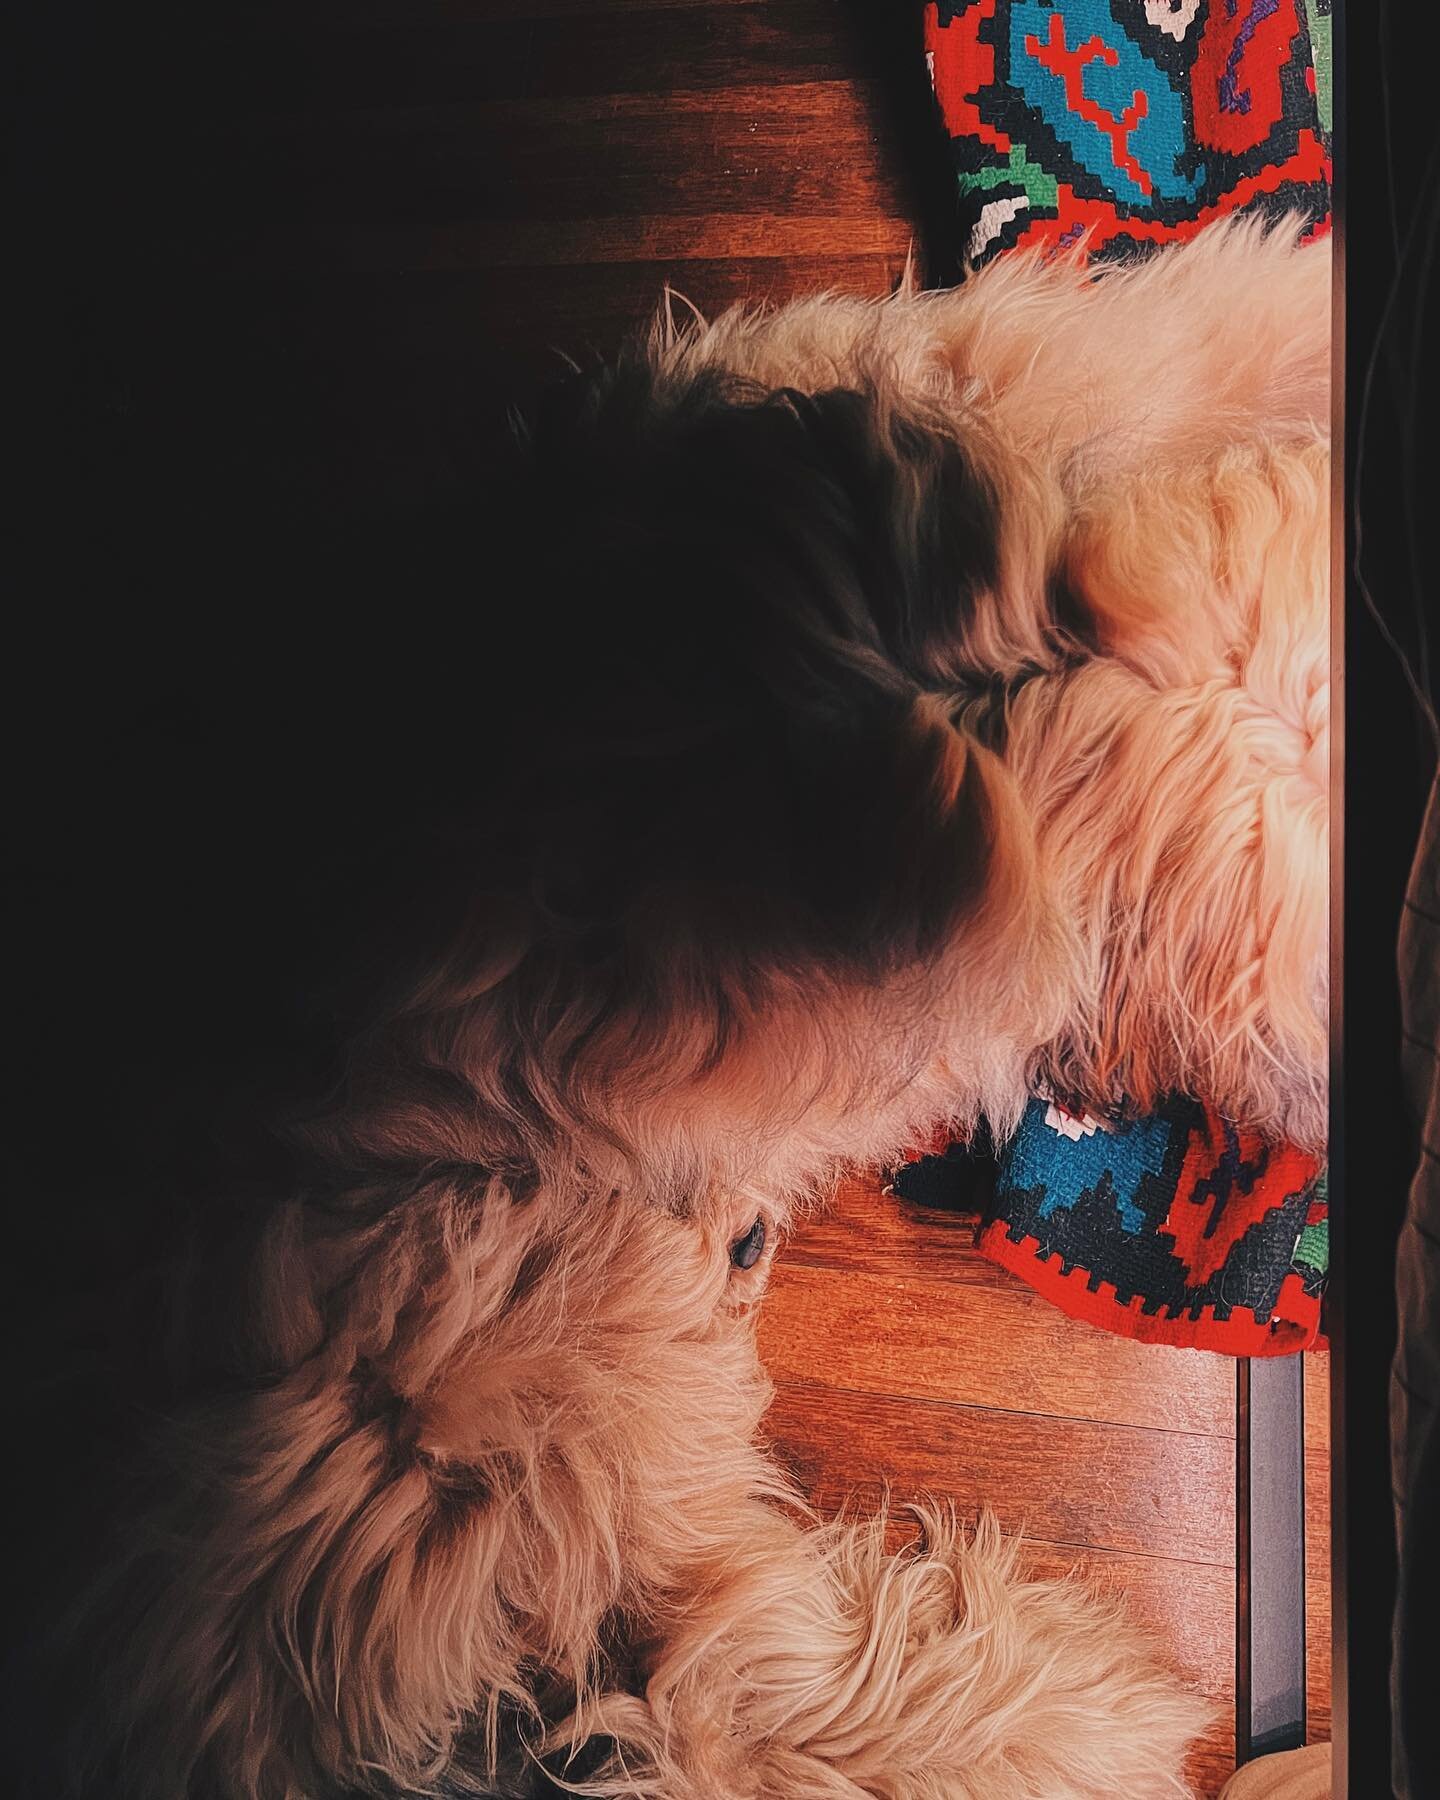 You can&rsquo;t hide (from the alarm clock)

#briard #briardlove #briardsofinstagram #vsco #iphonography